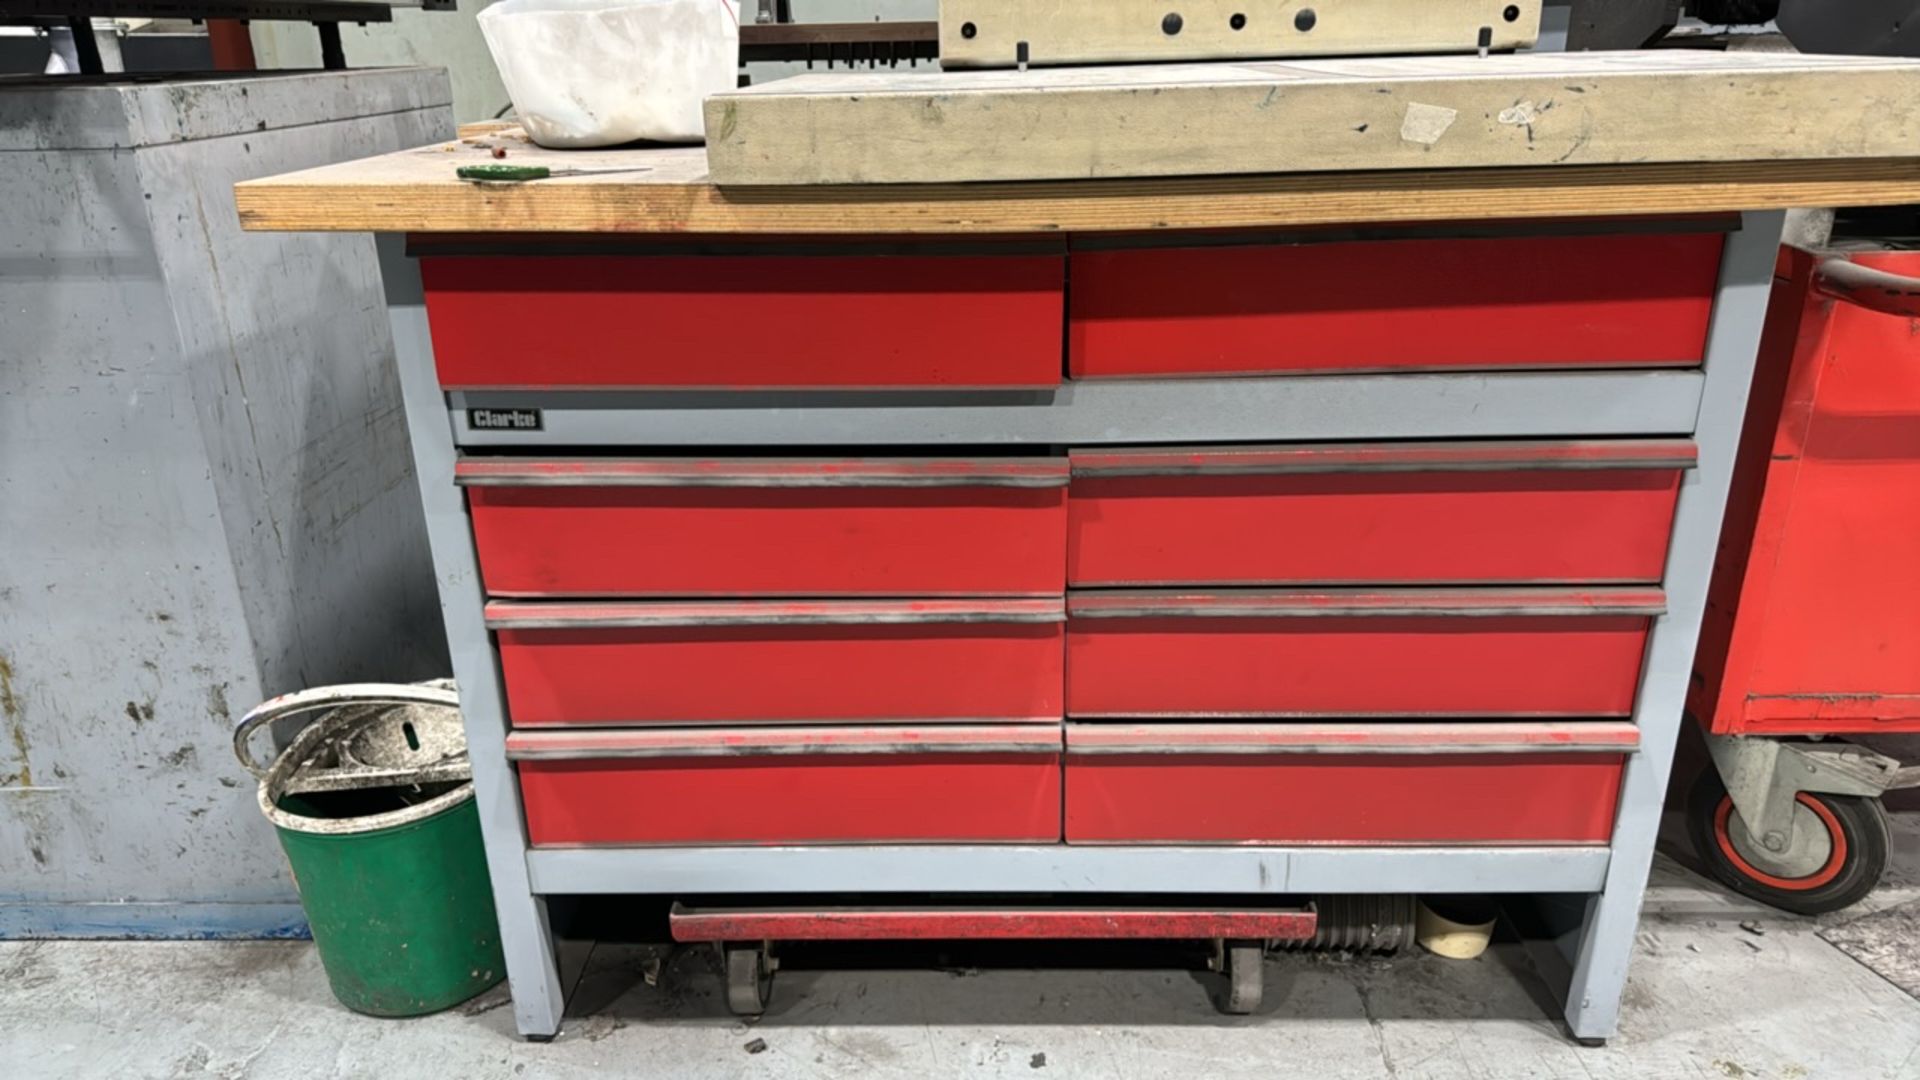 Clarke Work Bench with Tool Drawers - Image 2 of 4